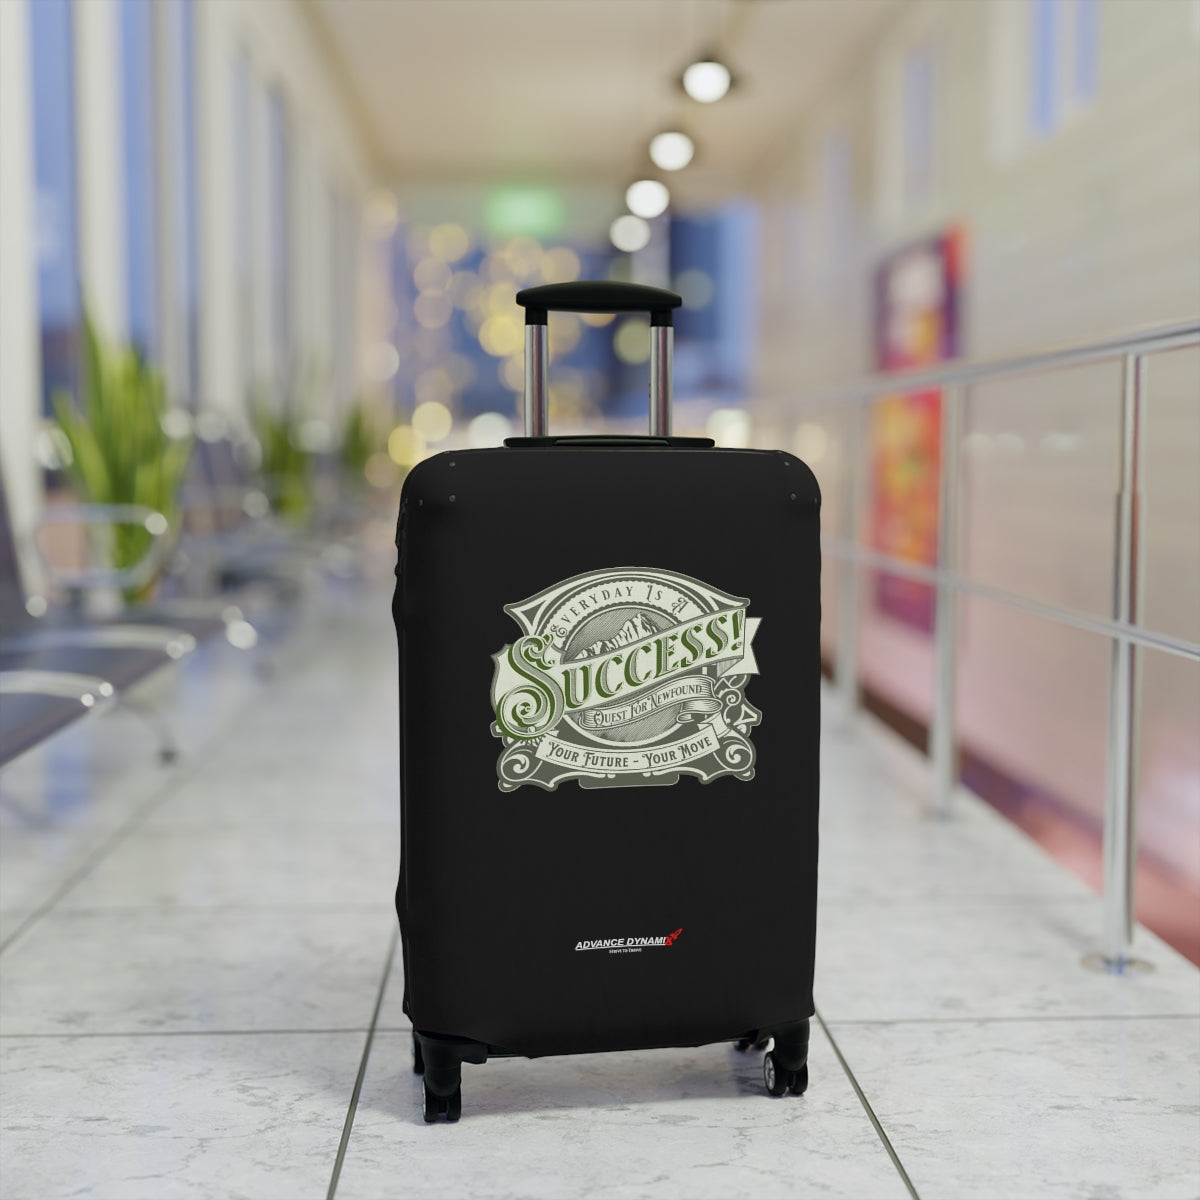 Every day is a quest for newfound success - Your future, your move - Luggage Covers Infused with Advance Dynamix Add-A-Tude - Tell the world!